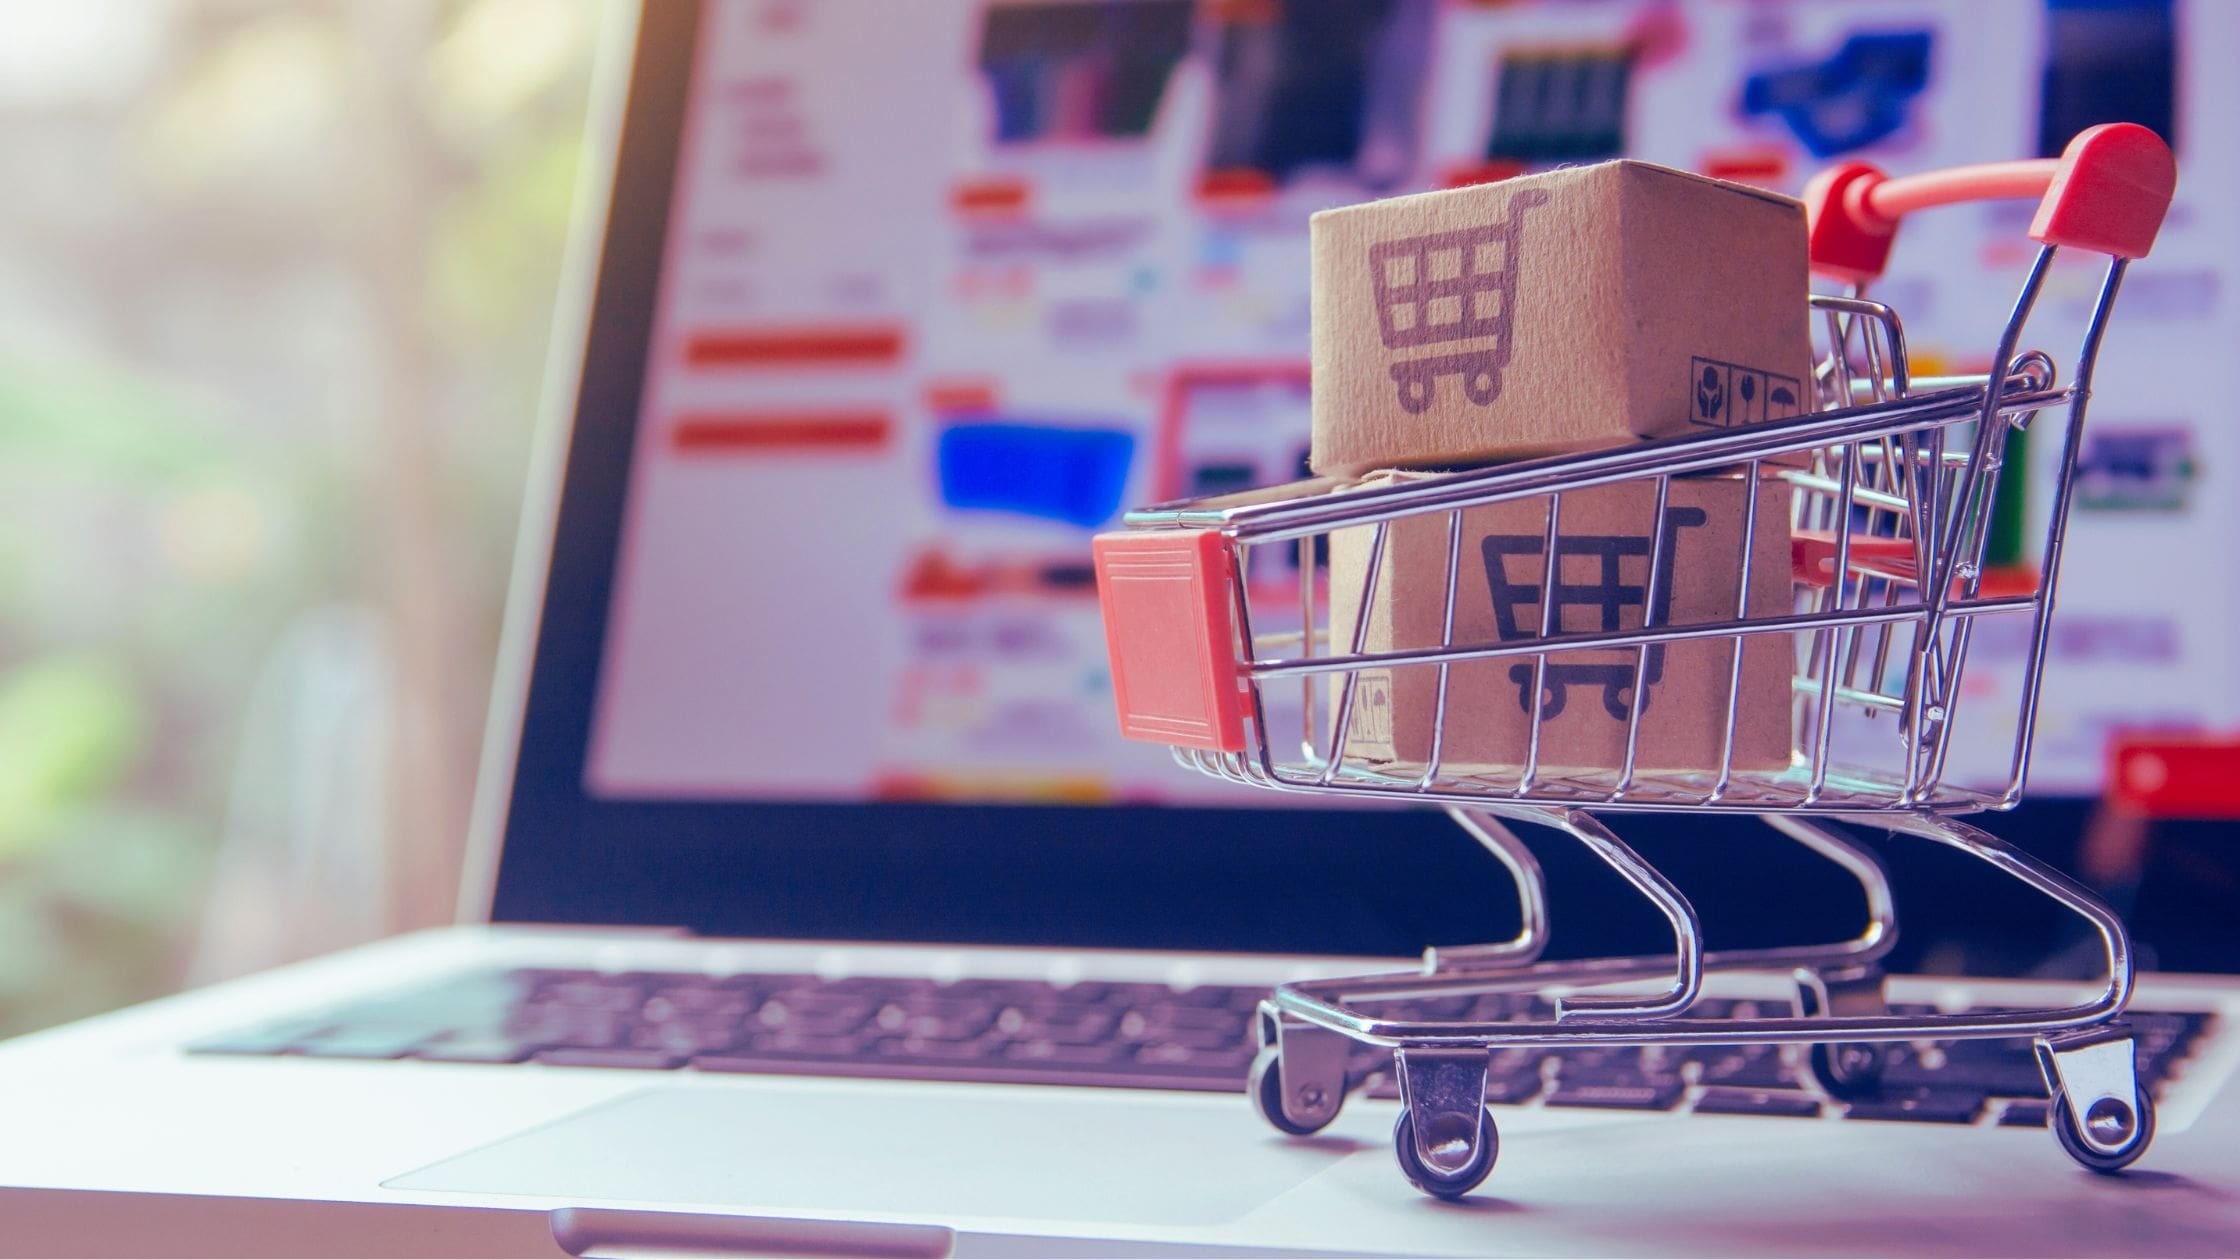 The future of retail with composable commerce